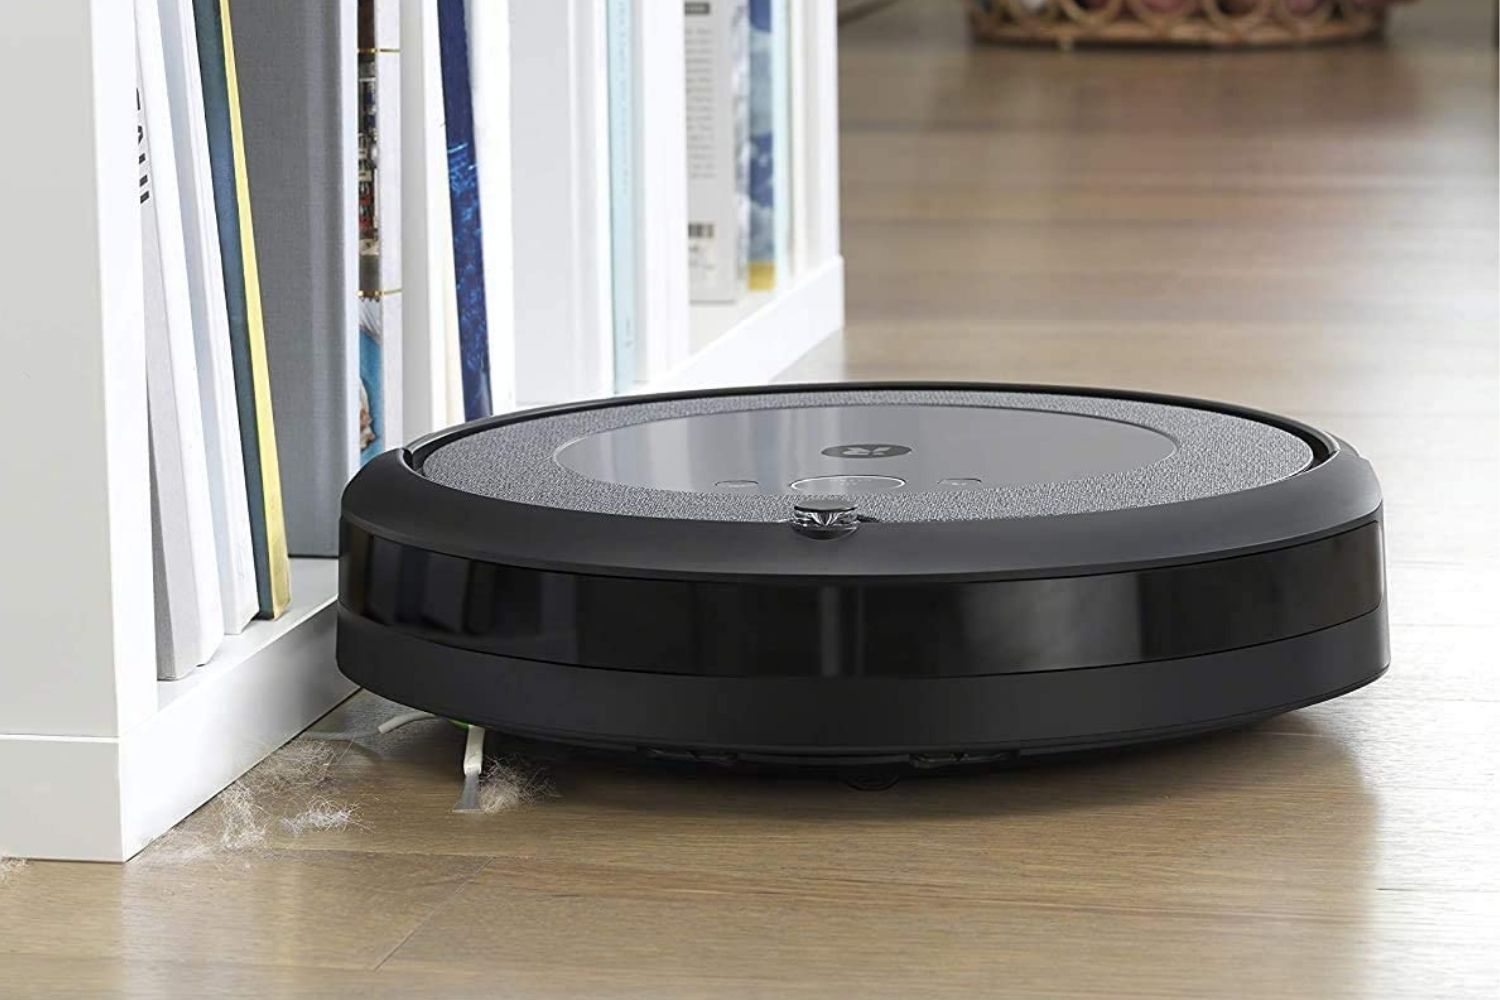 The iRobot Roomba i3 cleaning along base trim.